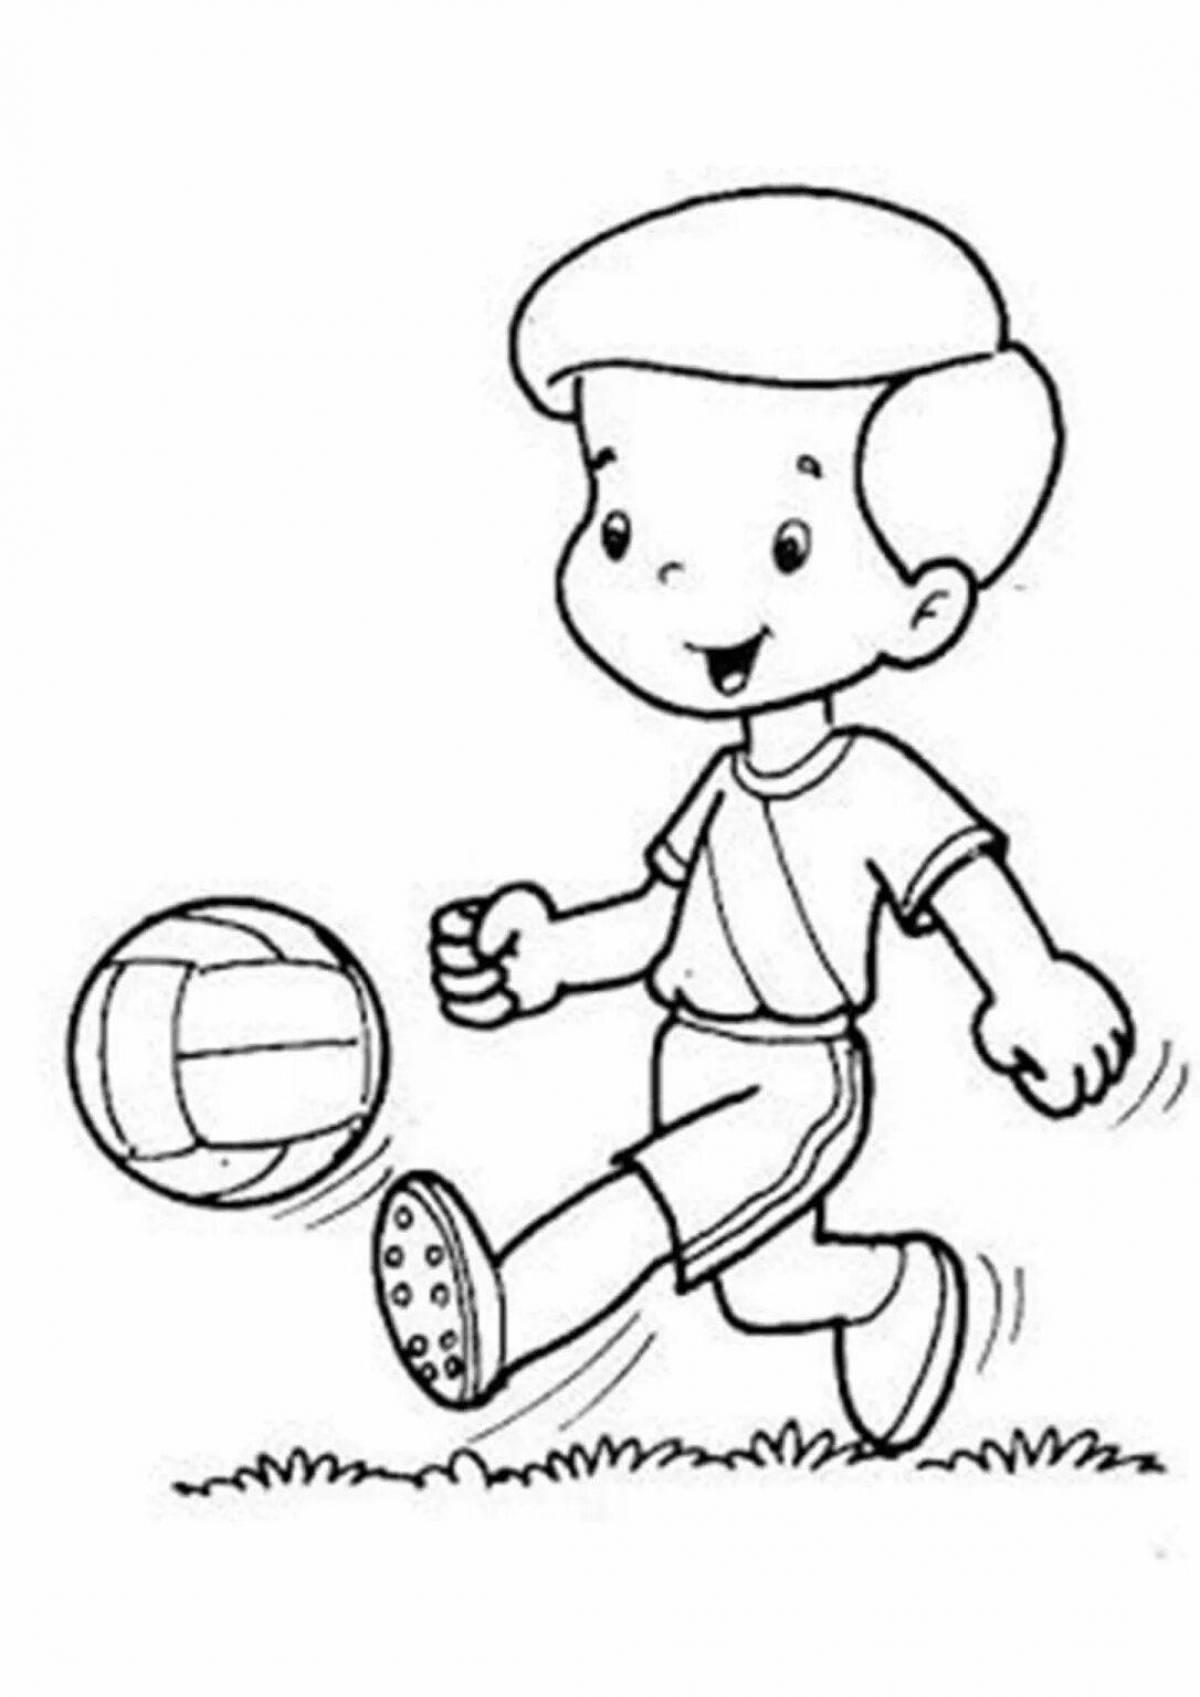 Physical education creative coloring book